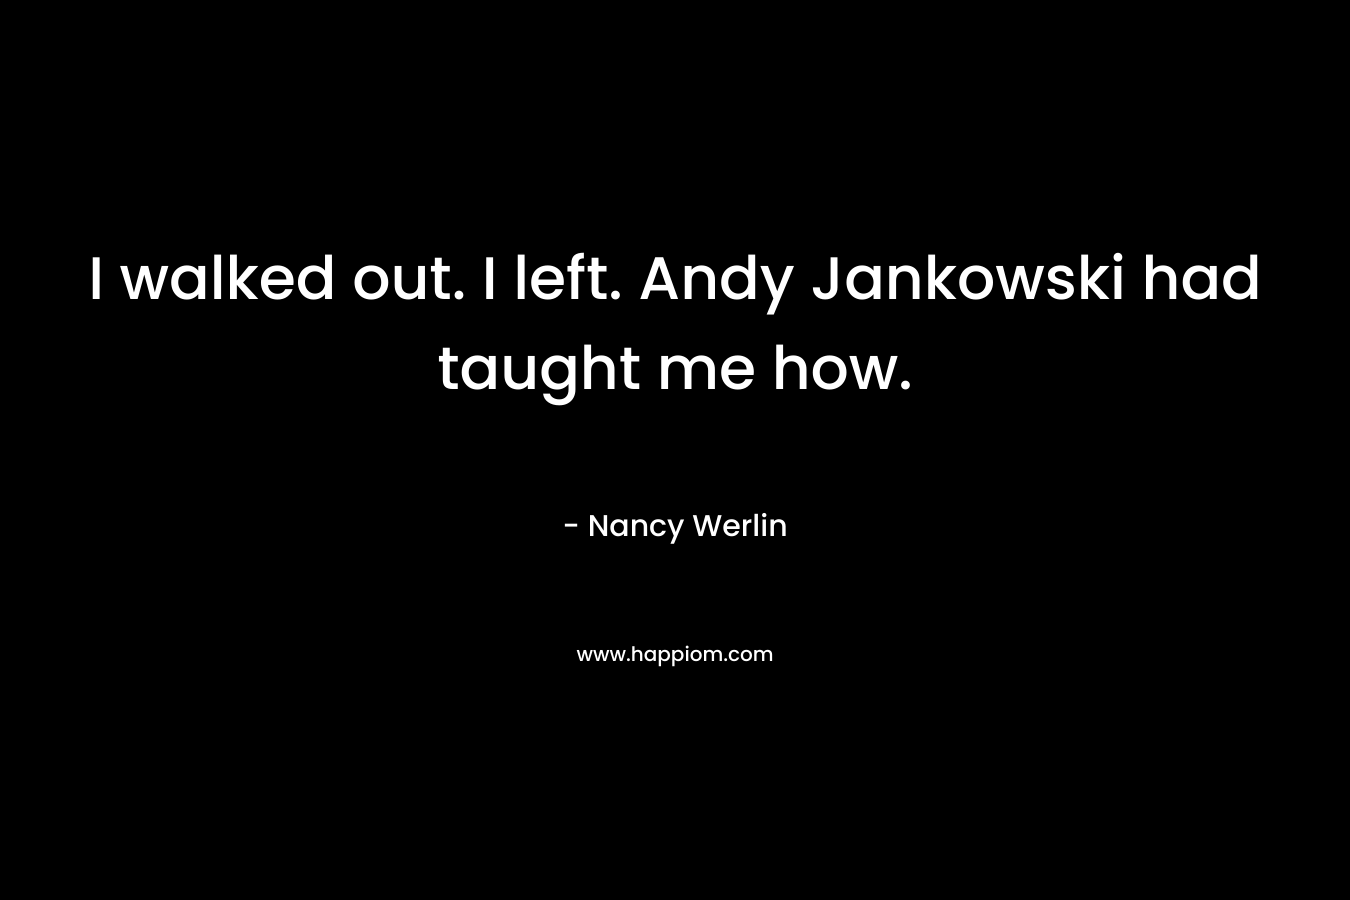 I walked out. I left. Andy Jankowski had taught me how. – Nancy Werlin